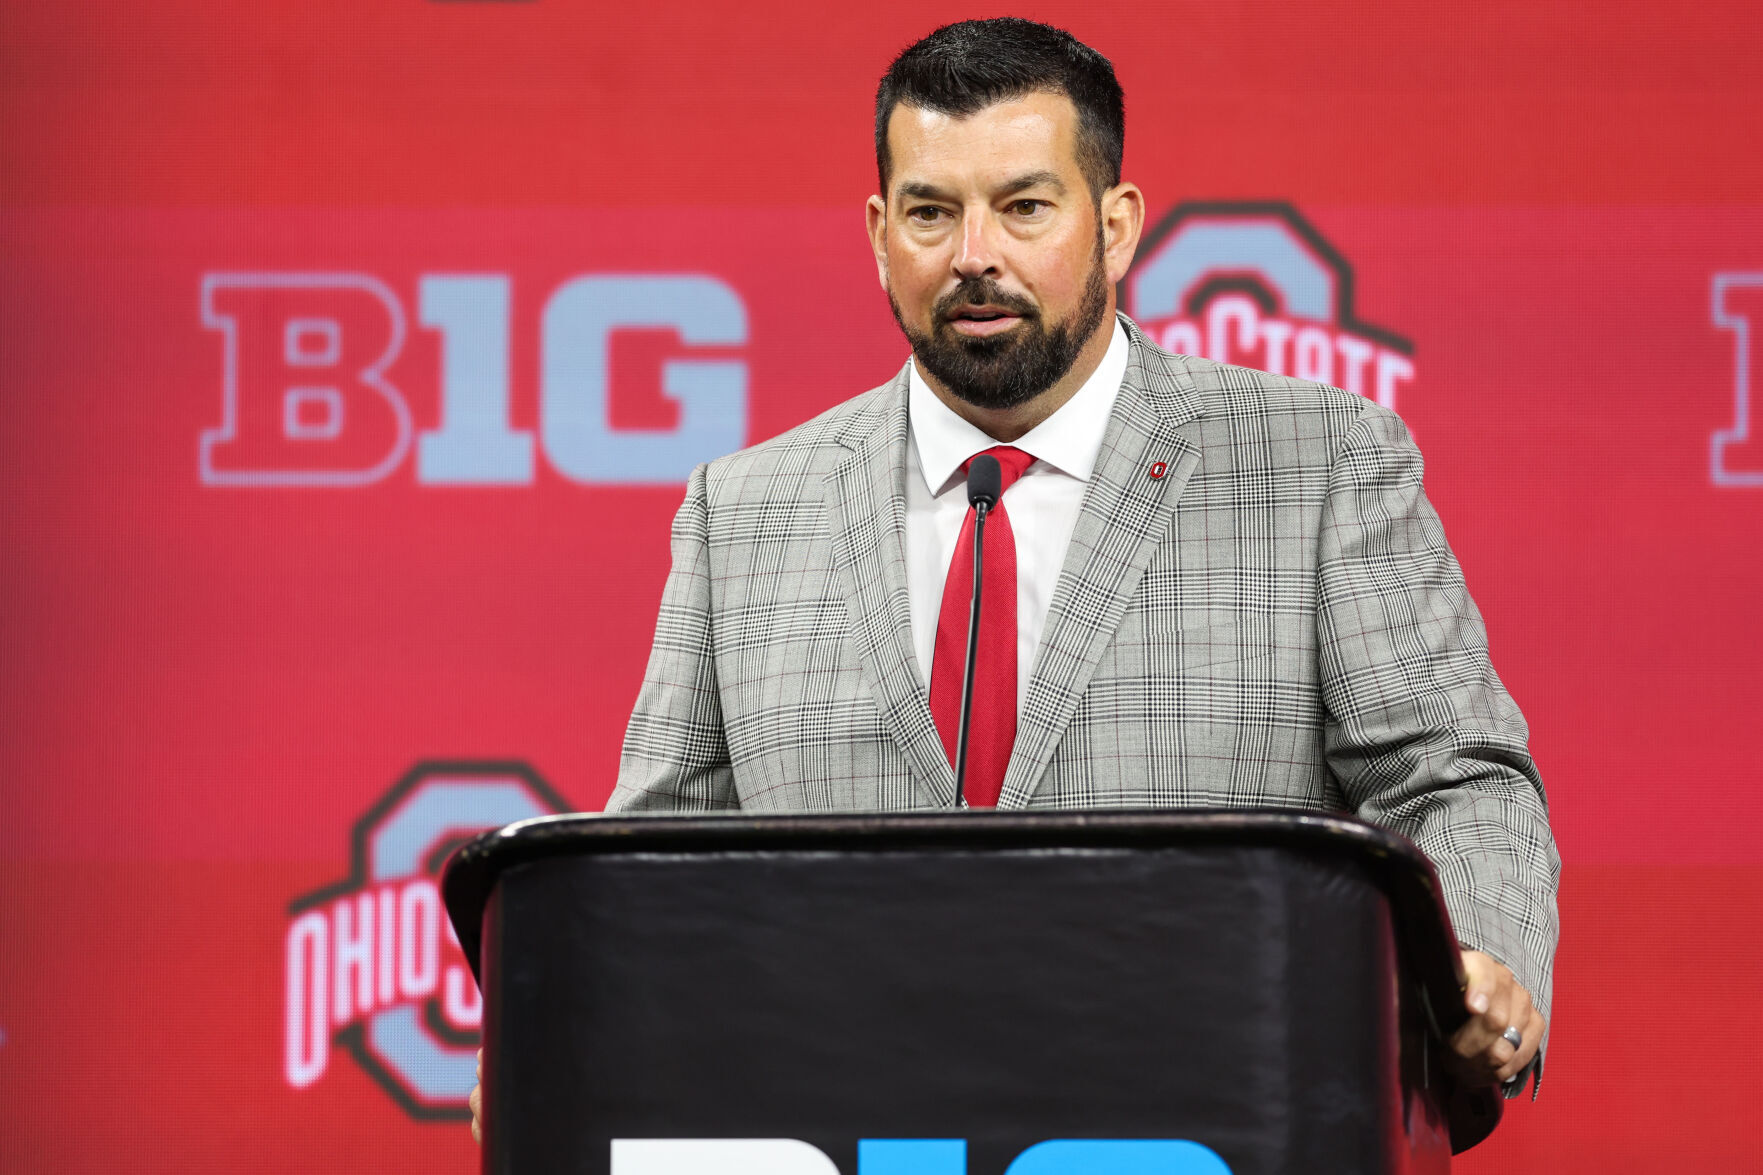 Big Ten TV deal What does it mean for fans watching games?